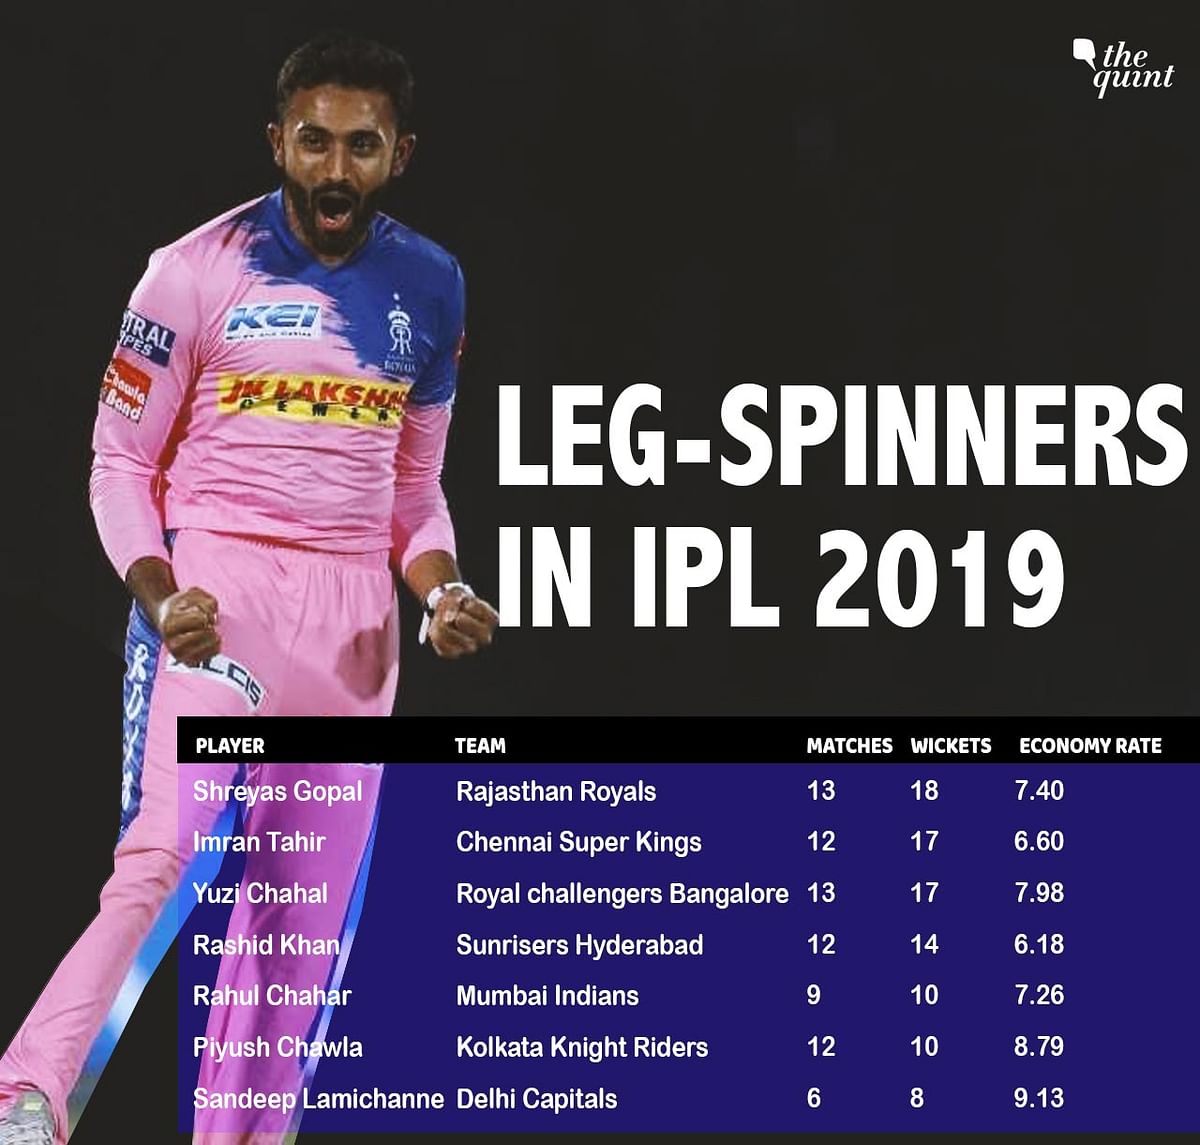 Apart from Kuldeep Yadav, most of these spinners have been able to restrict the ru n flow or take wickets.